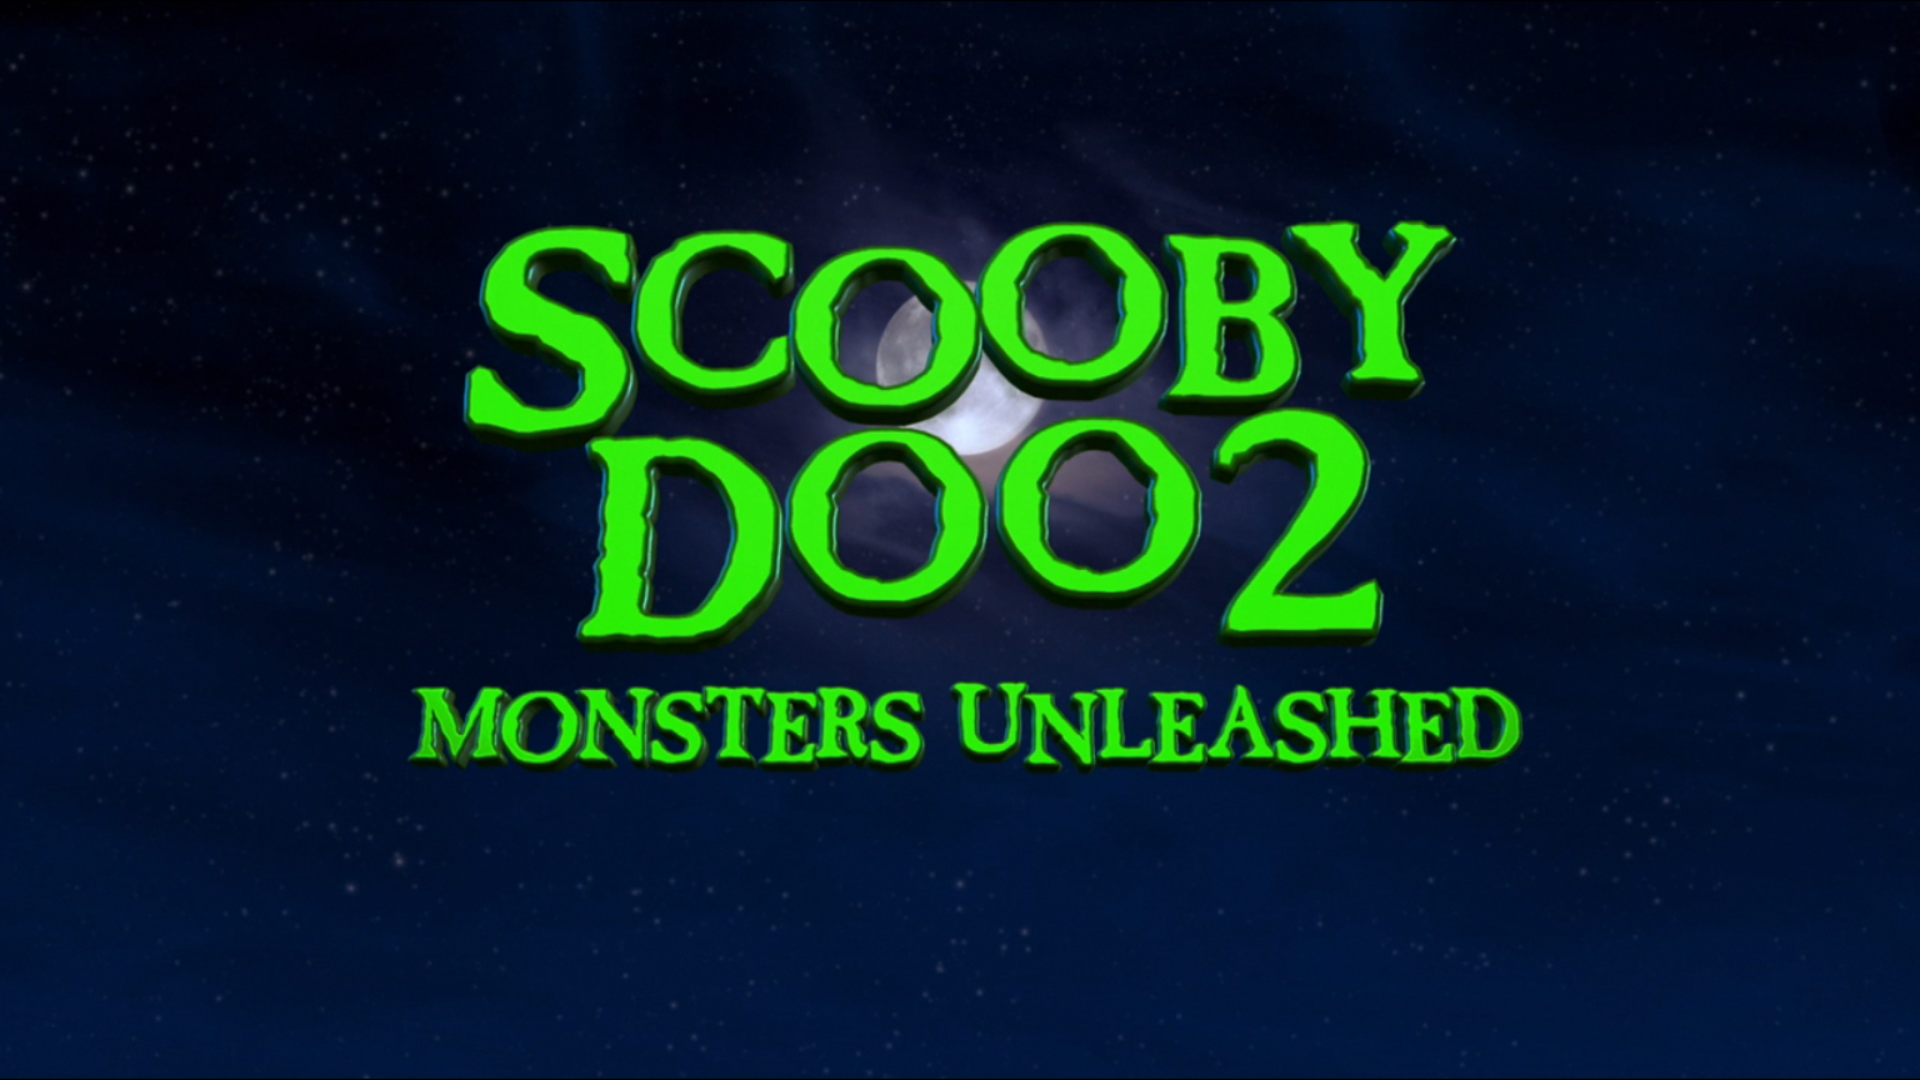 scooby doo 2 monsters unleashed part 7